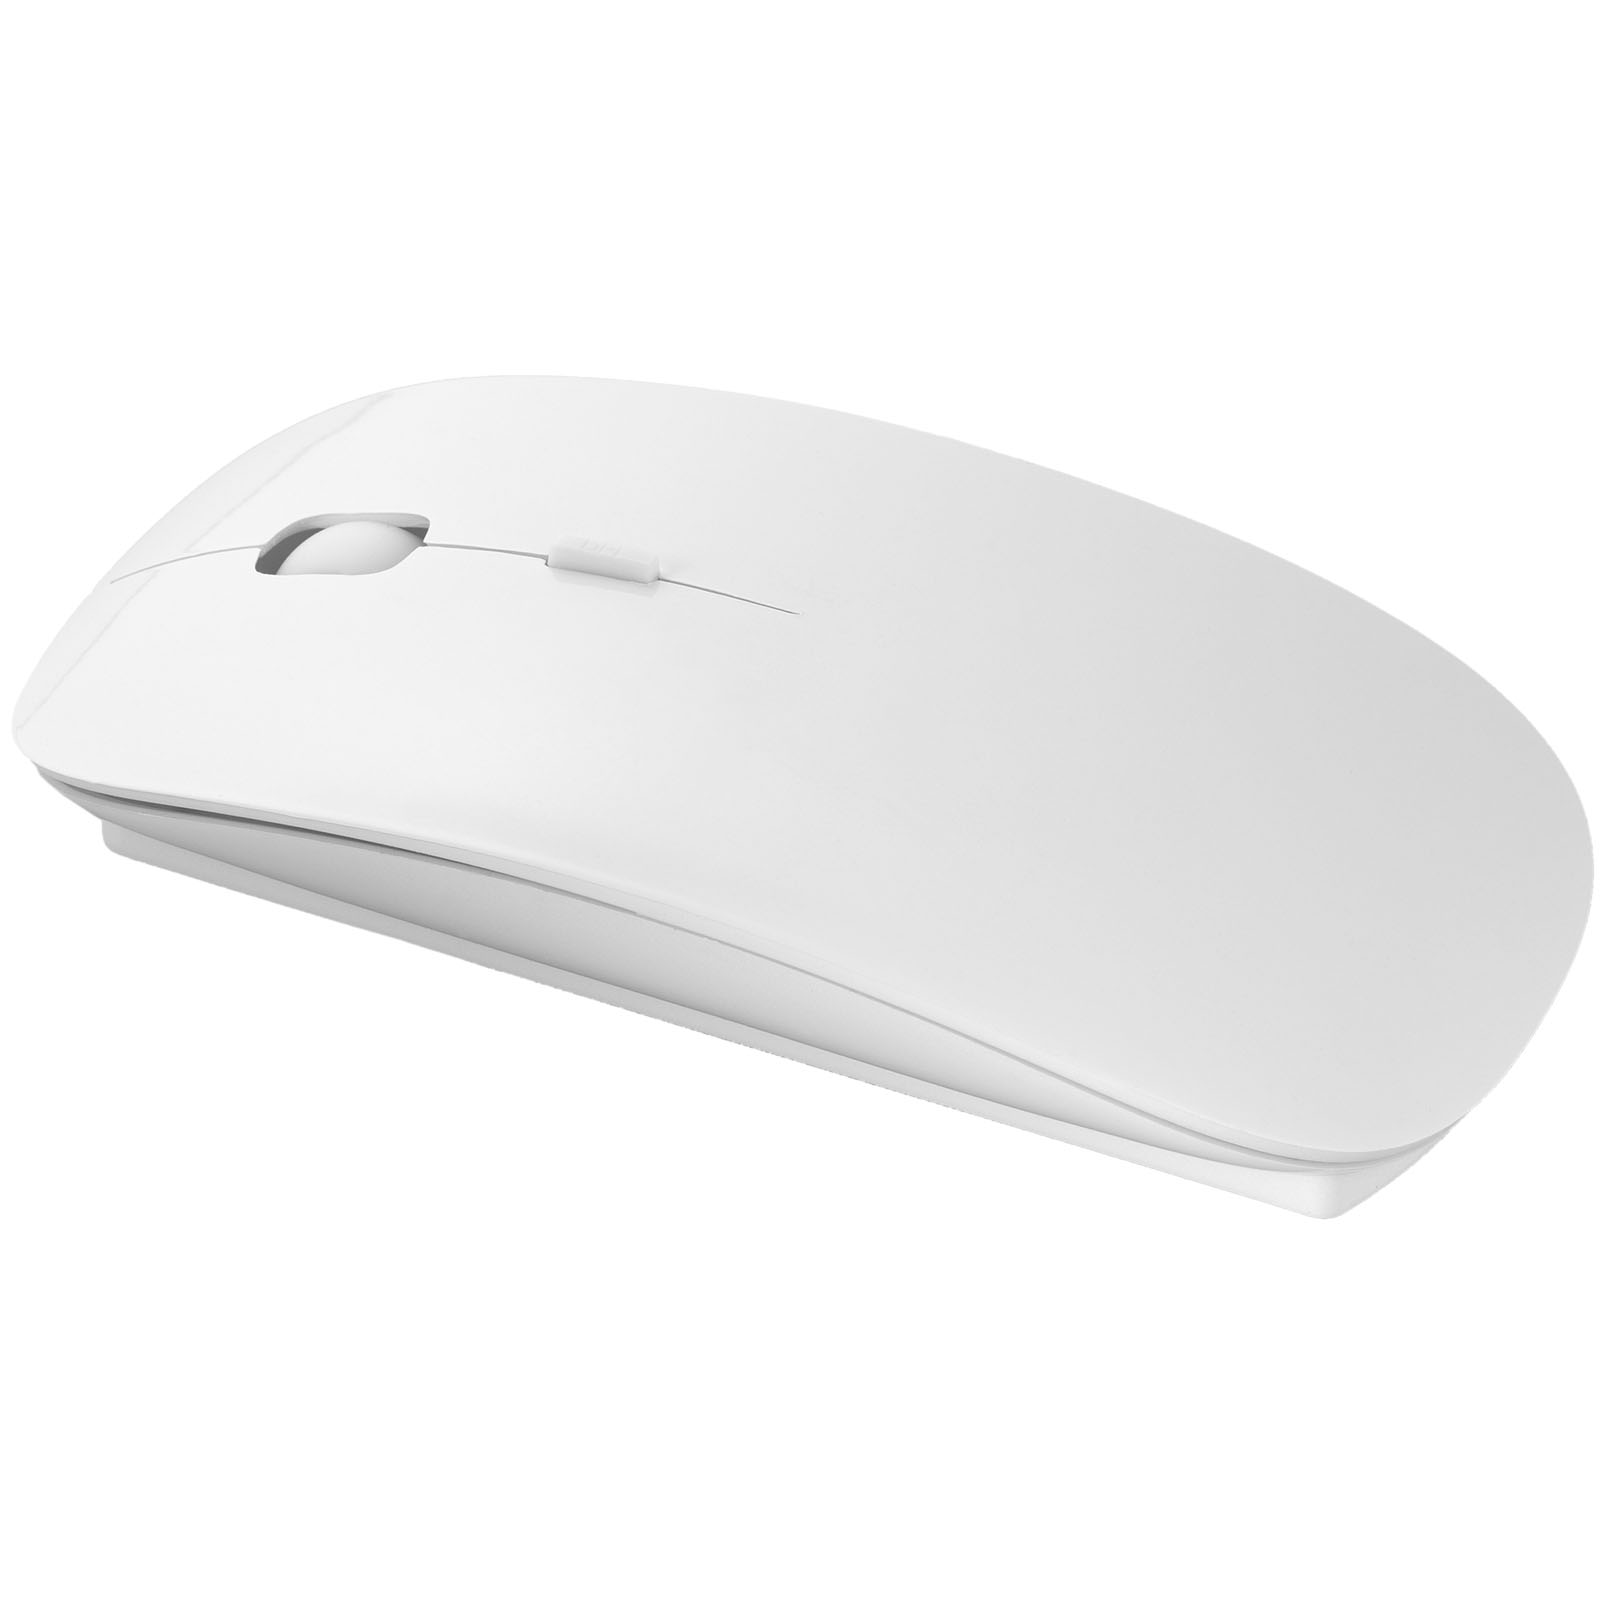 Advertising Computer Accessories - Menlo wireless mouse - 0